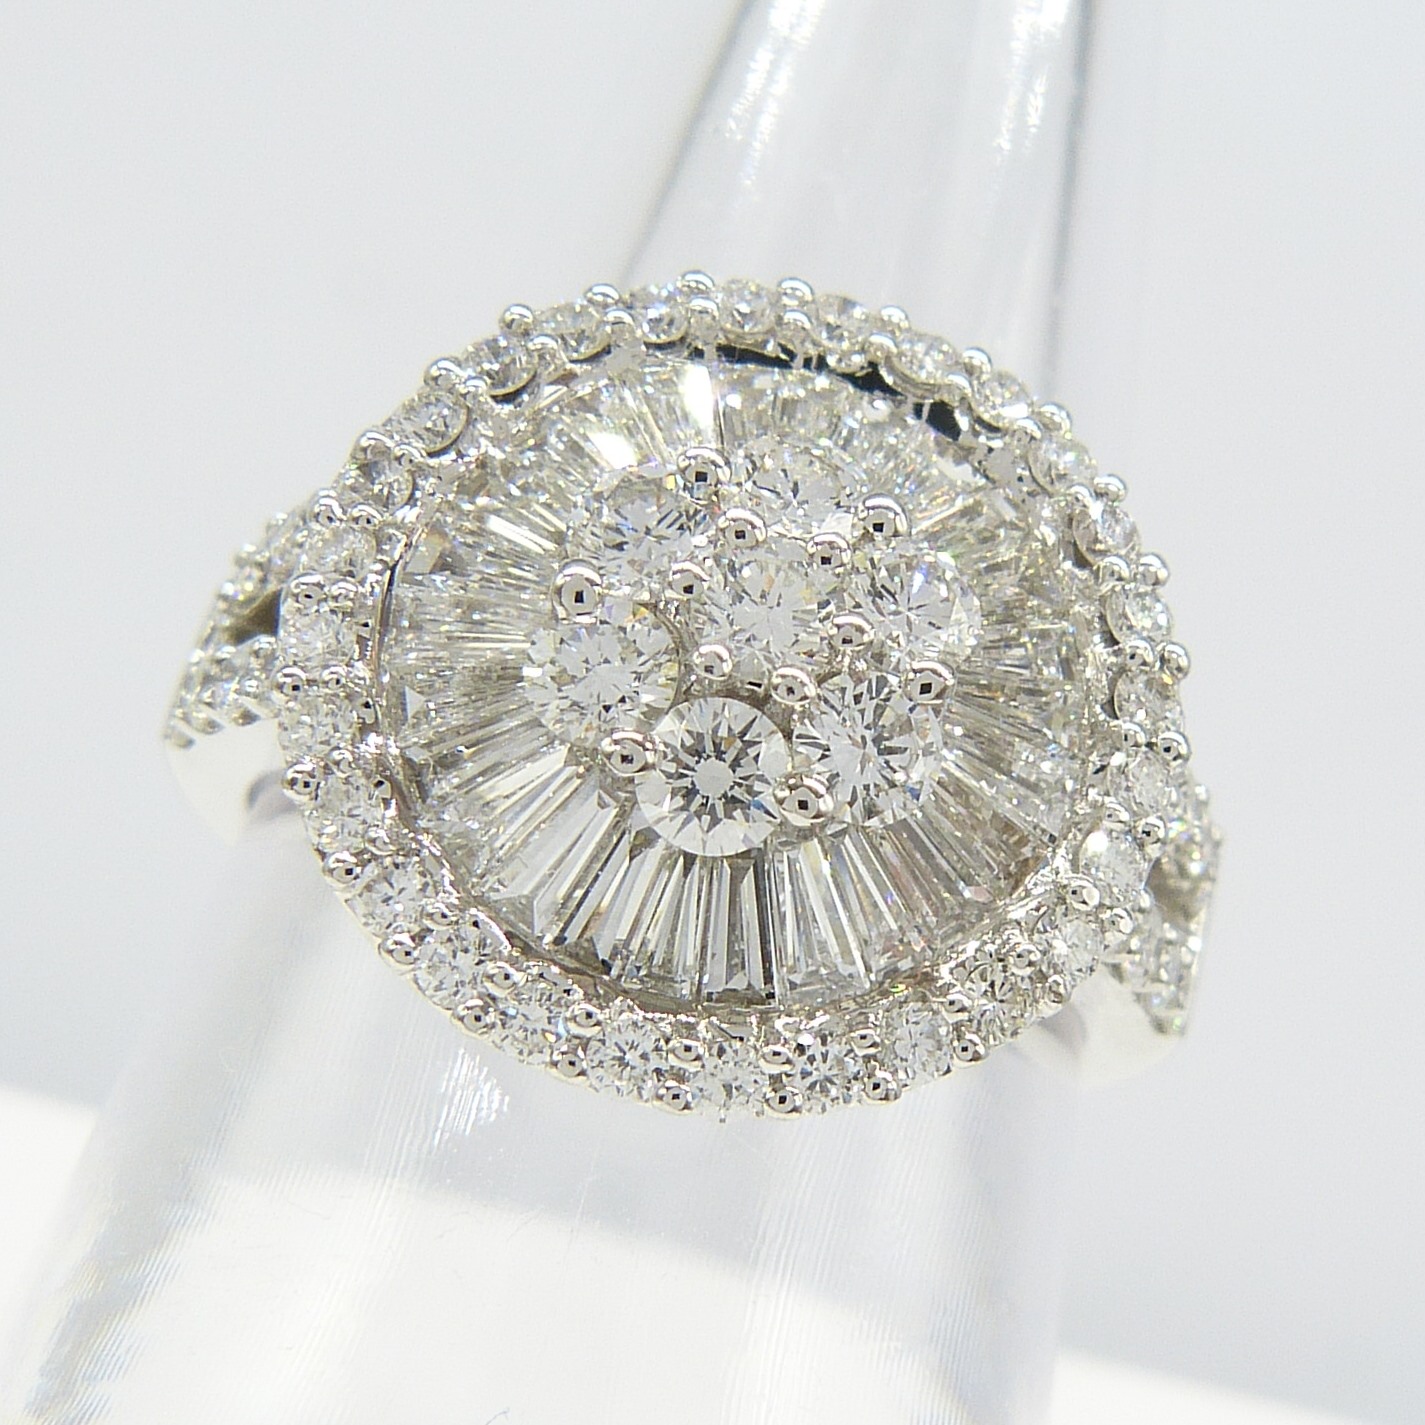 An attractive, certificated, 2.05 carat Diamond cluster ring in 18k white Gold, with Diamond - Image 3 of 10